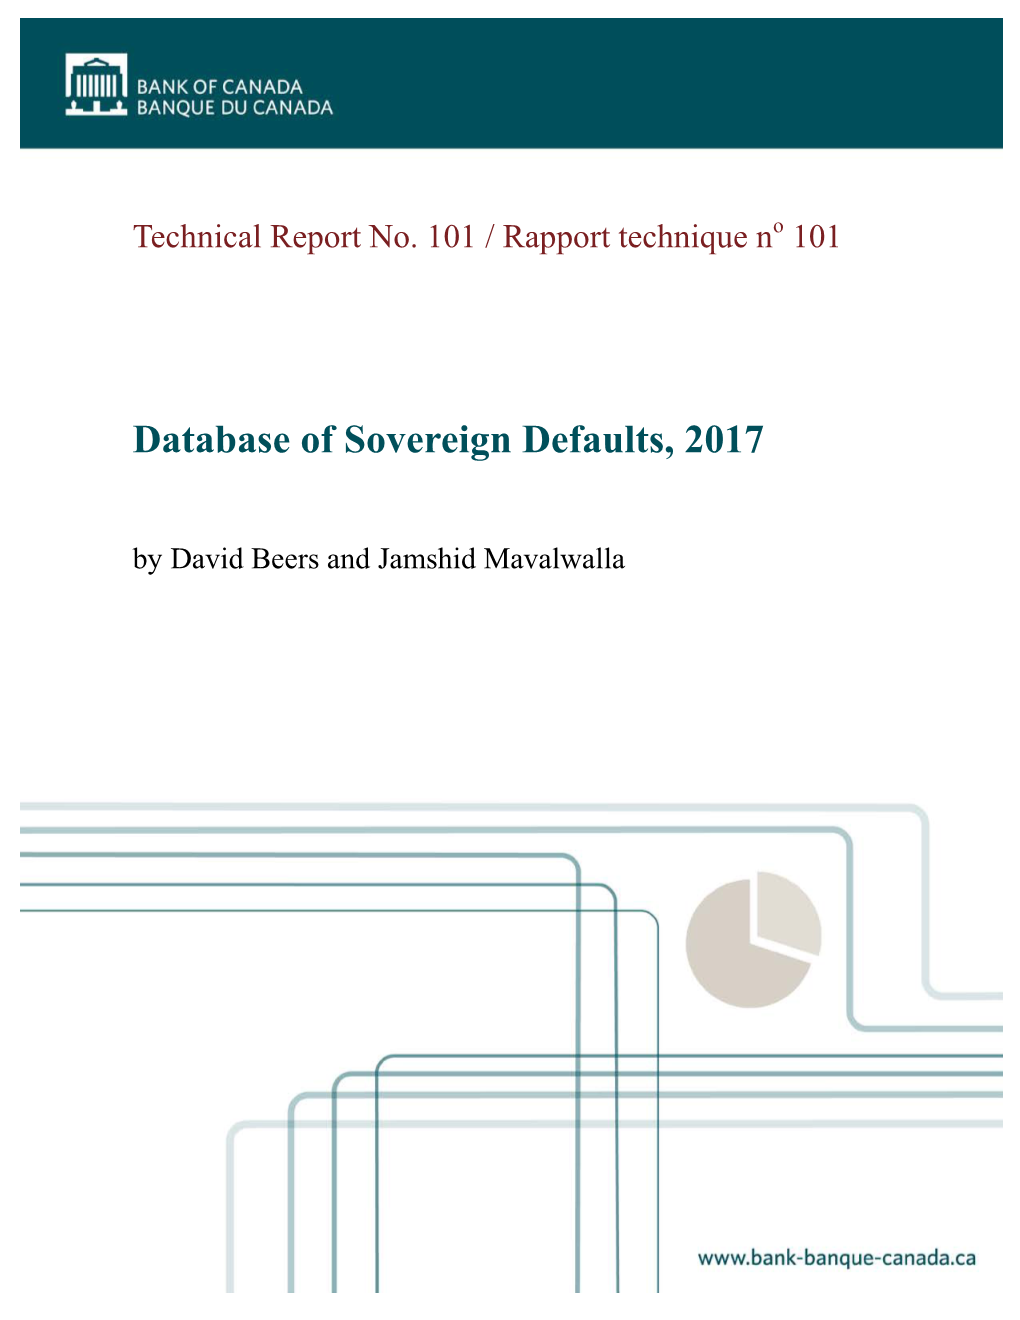 Database of Sovereign Defaults, 2017 by David Beers and Jamshid Mavalwalla